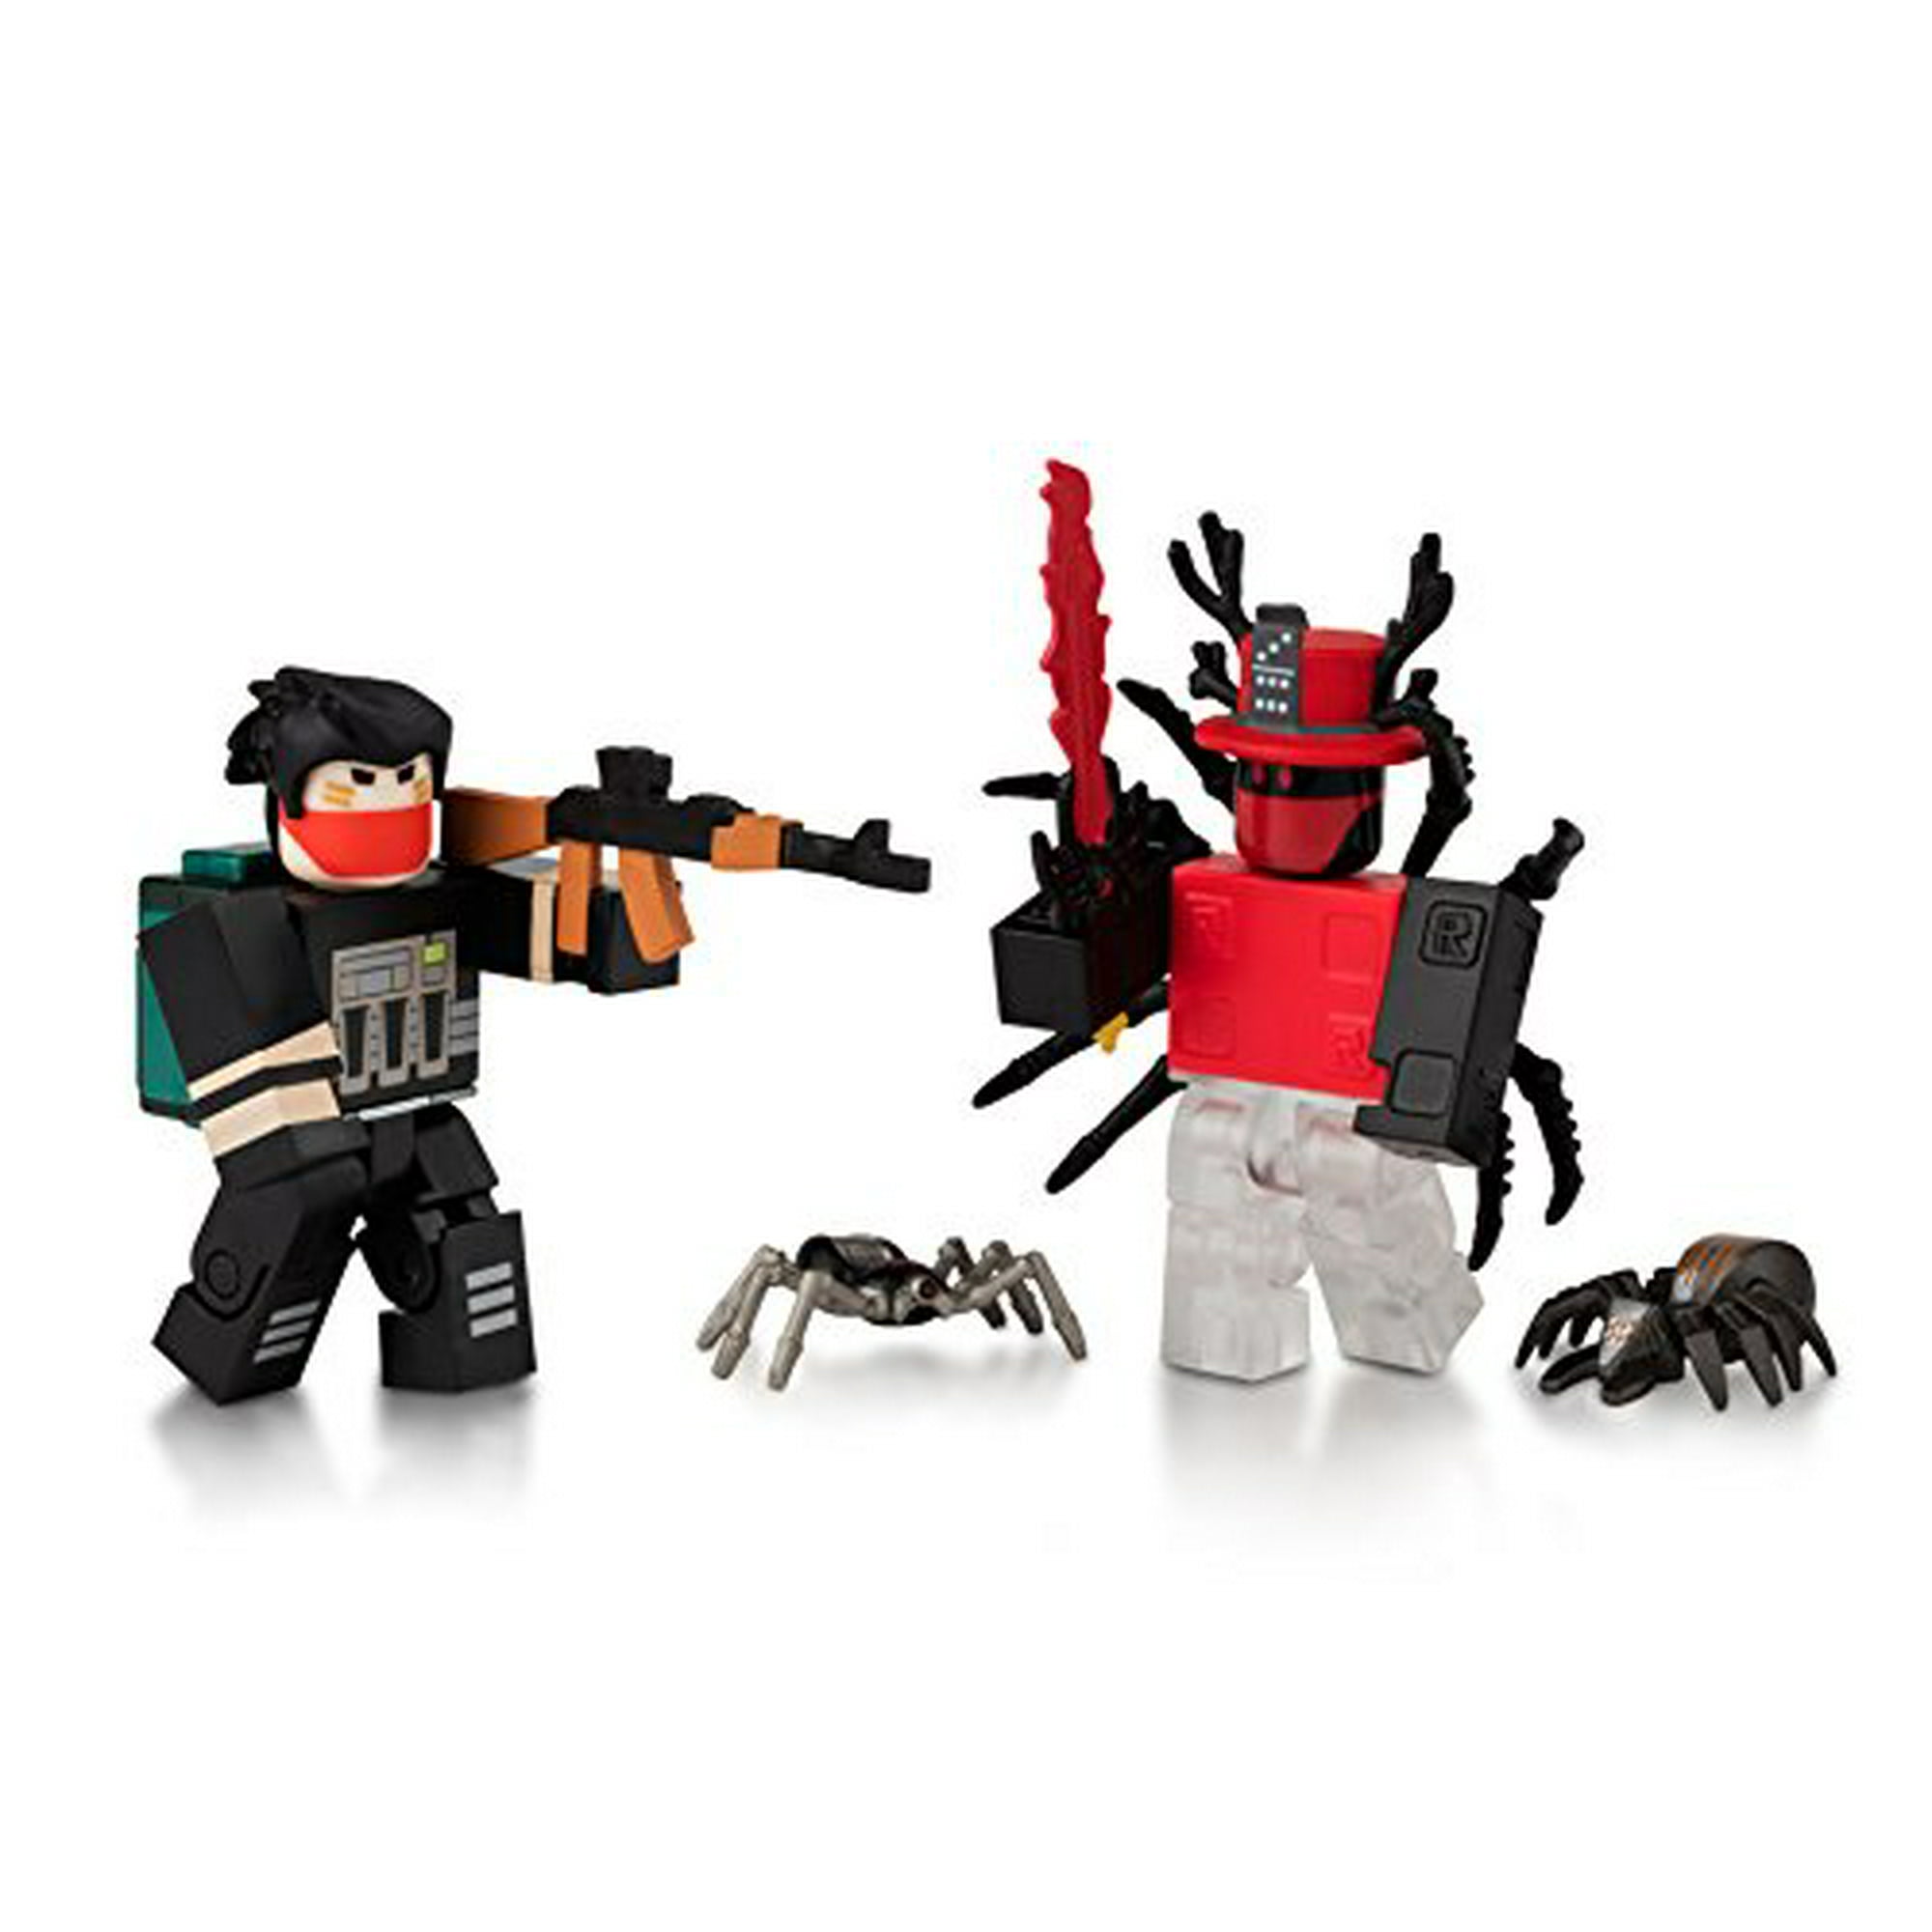 Roblox Apocalypse Rising Bandit And Homingbeacon The Whispering Dread Two Figure Pack Walmart Canada - apocalypse rising roblox codes